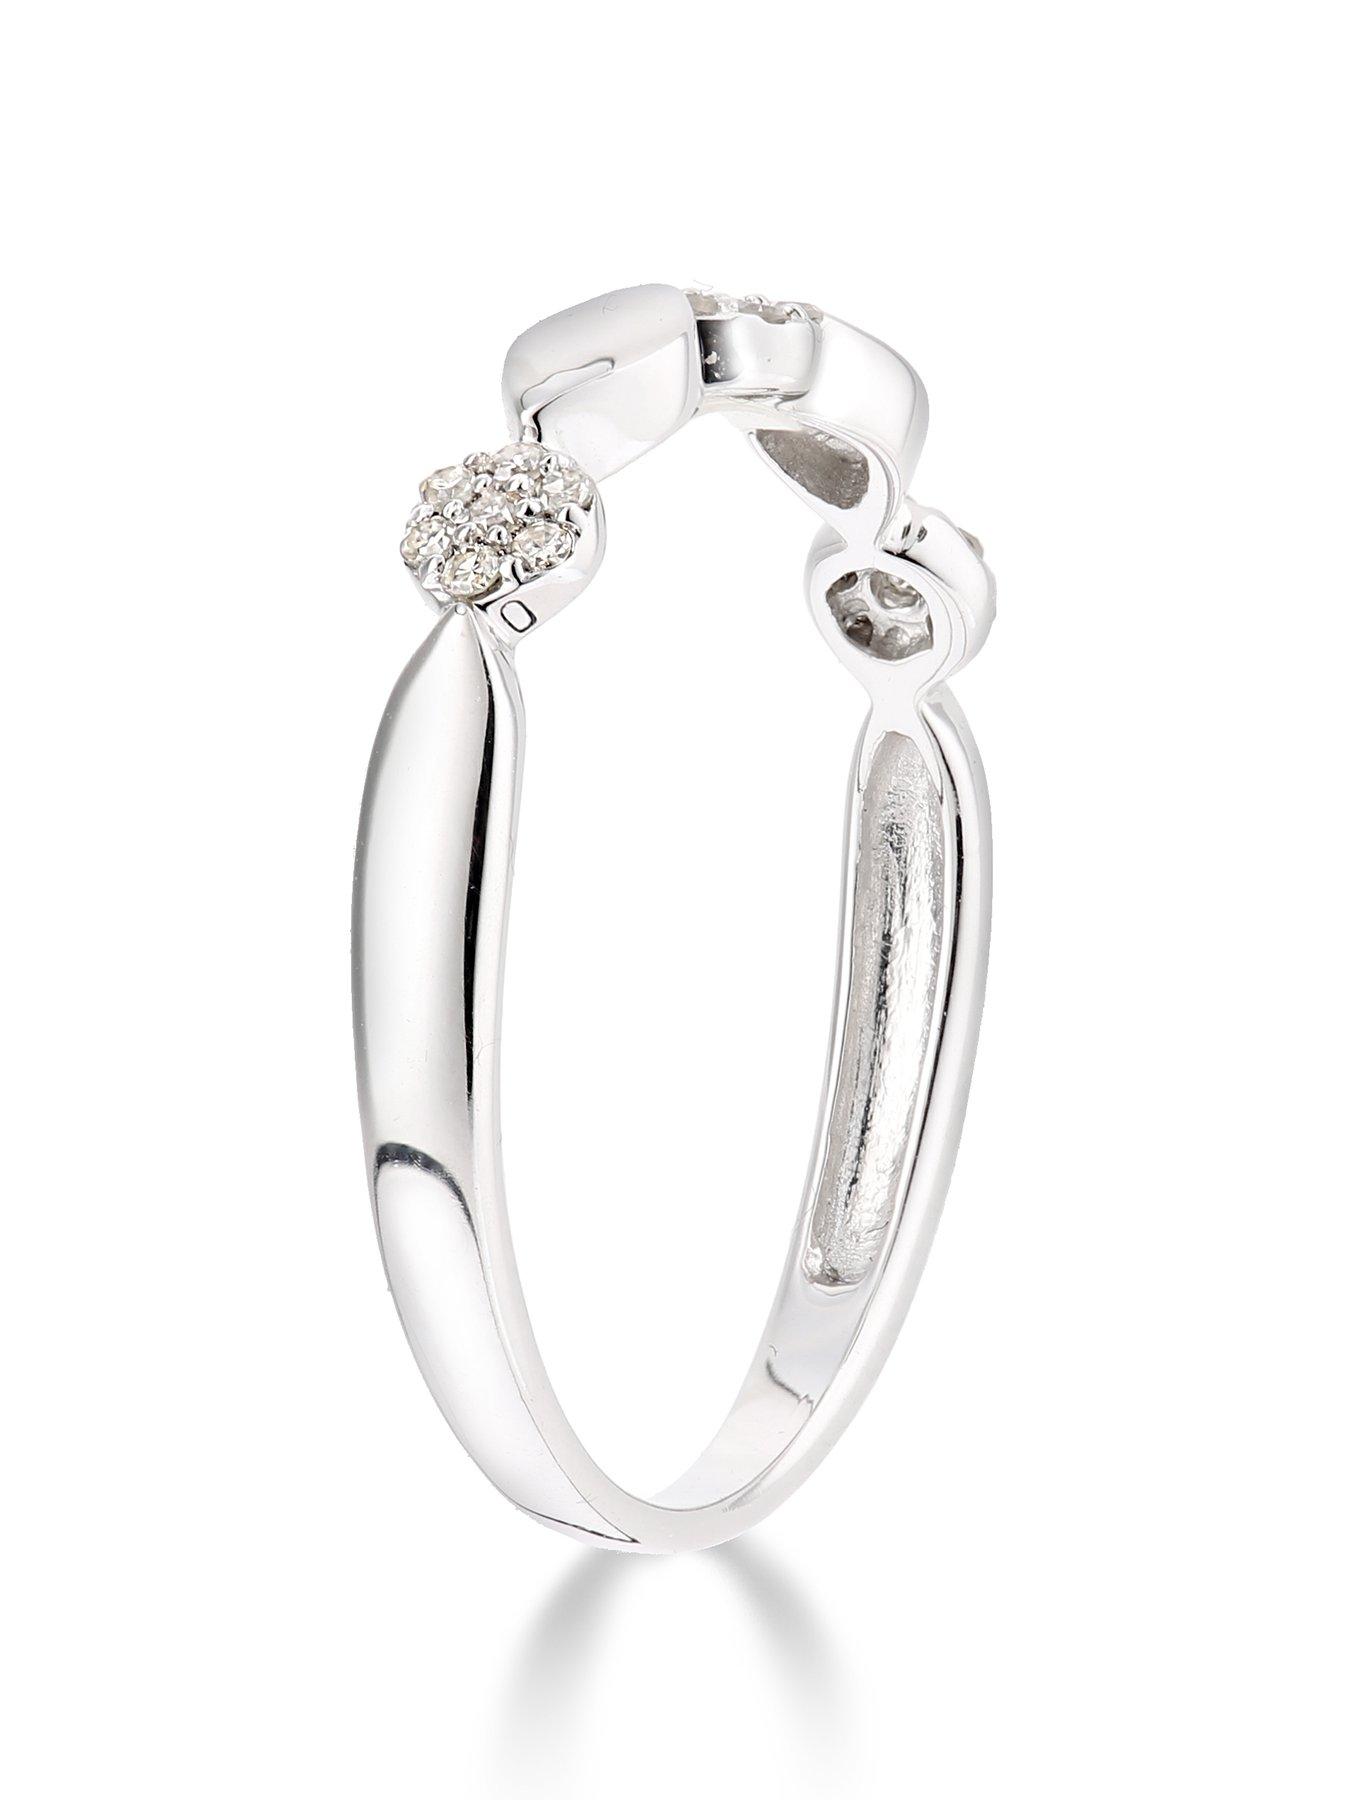  9ct White Gold 10 Point Diamond Commitment Ring